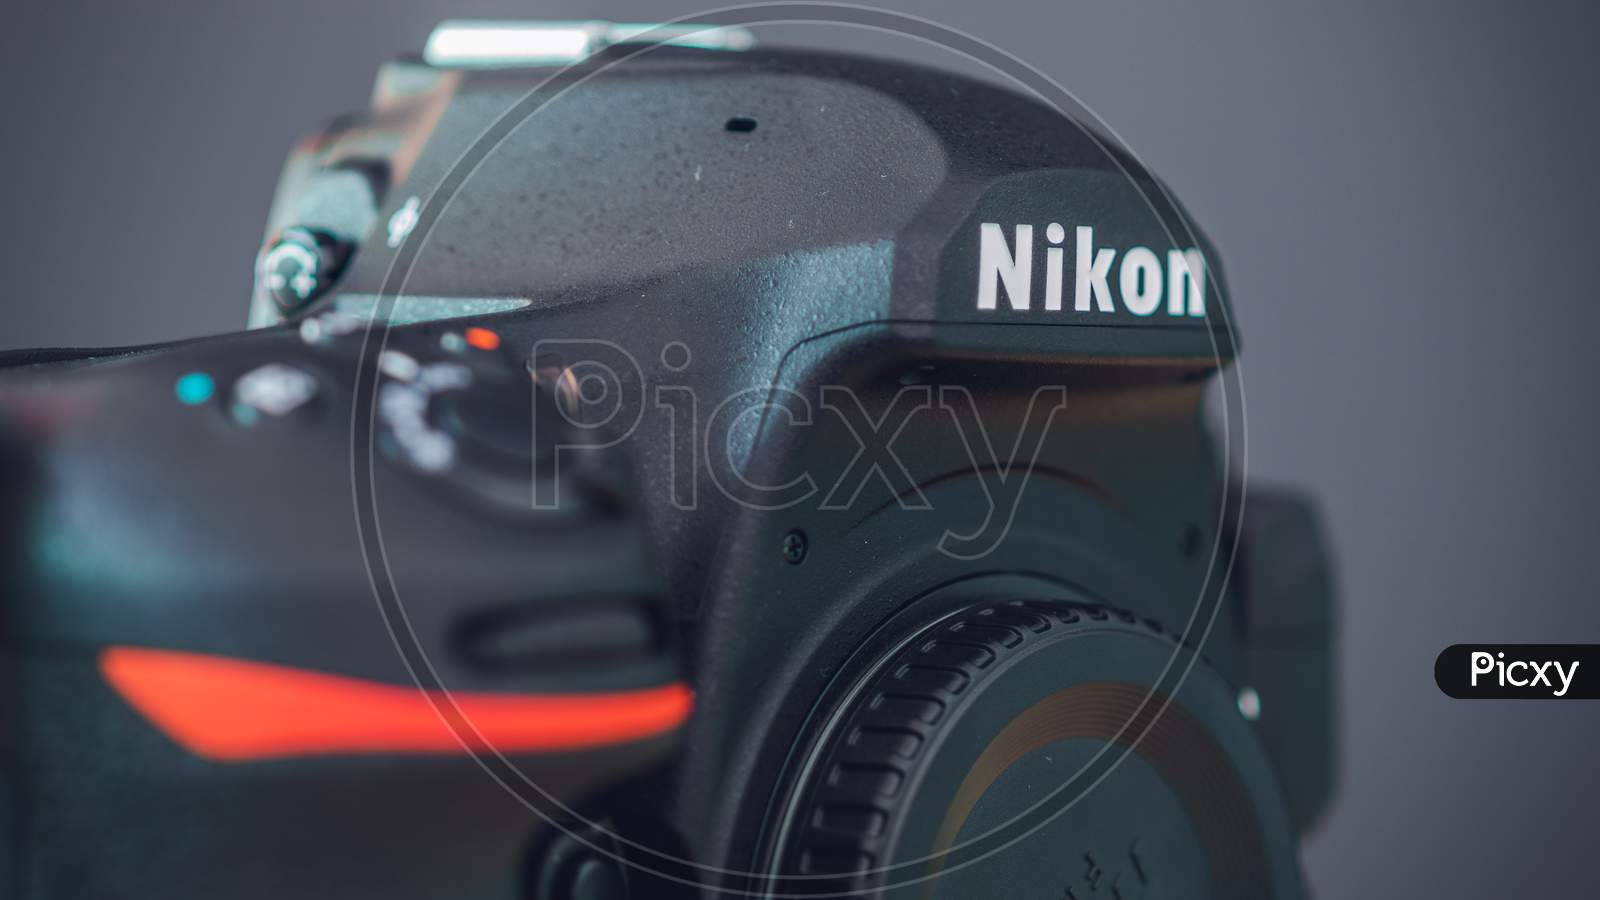 Galle, Sri Lanka - 02 17 2021: Nikon D850 Dslr Body With Camera Body Cap, Grip And Front Dials, And On-Off Switch Close Up. Highest Built Quality Modern Professional Consumer Dslr Camera Body,